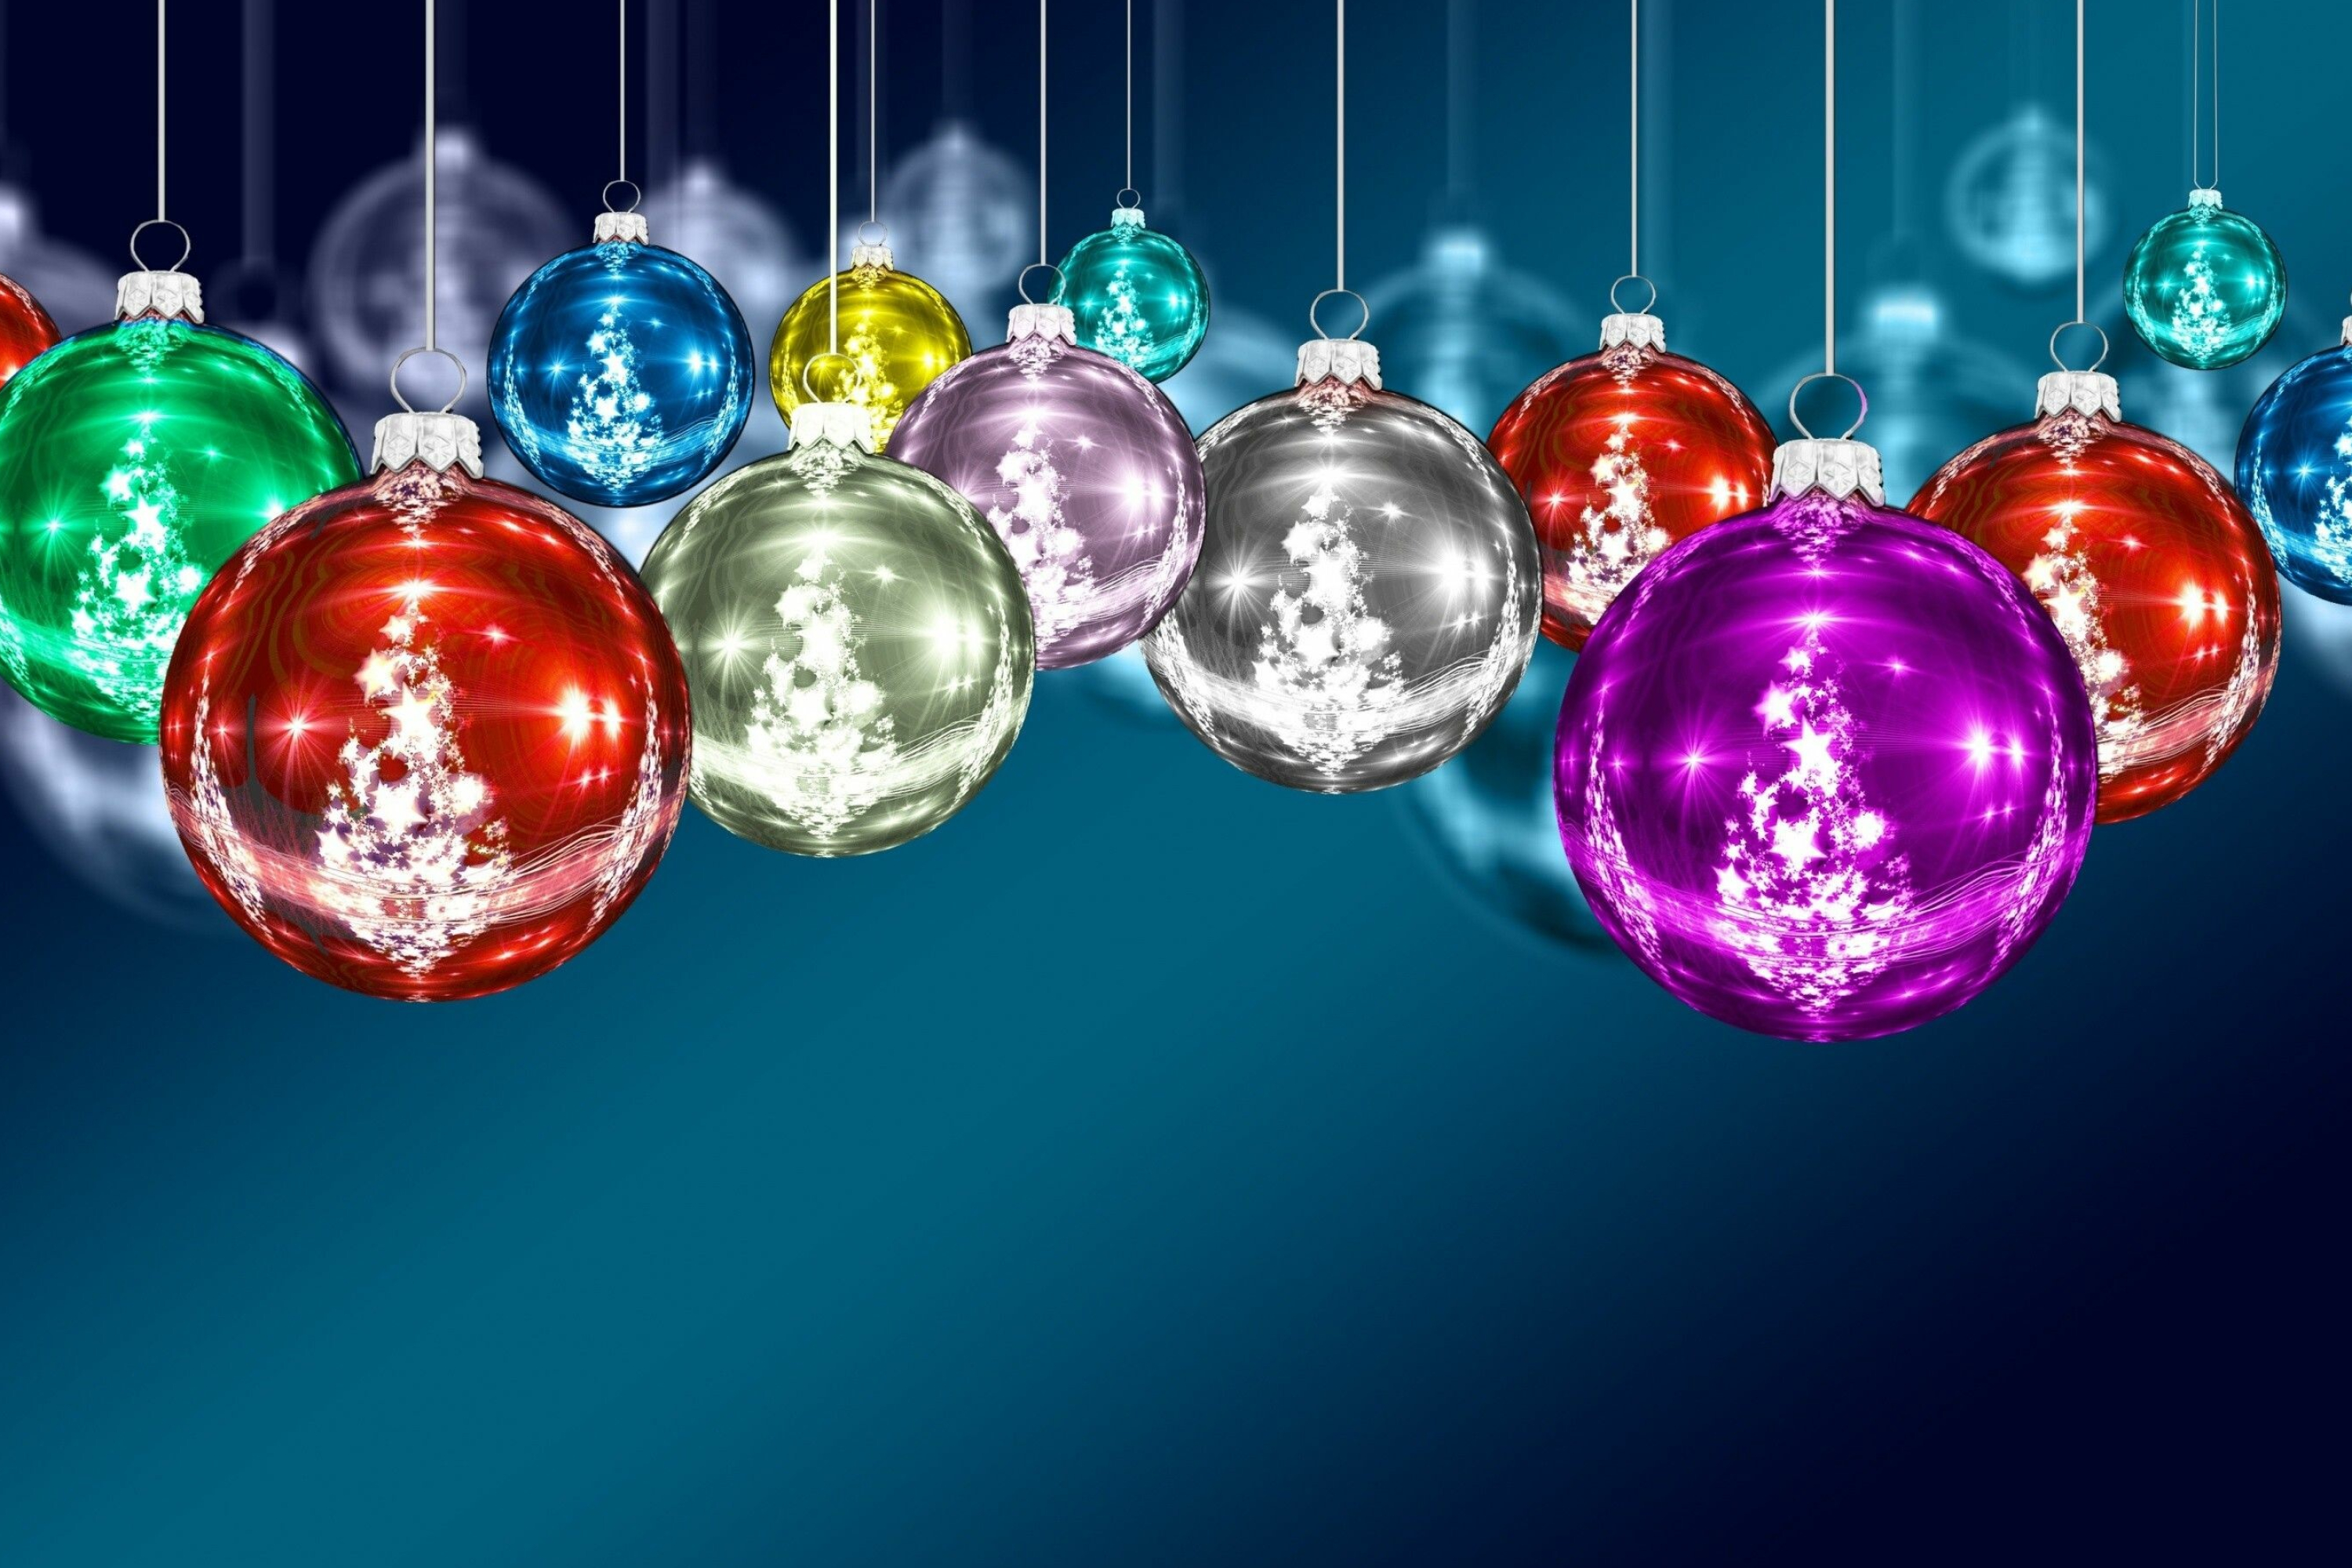 Christmas Ornament: Glass baubles were first made in Lauscha, Germany, and also garlands of glass beads and tin figures that could be hung on trees. 3000x2000 HD Wallpaper.